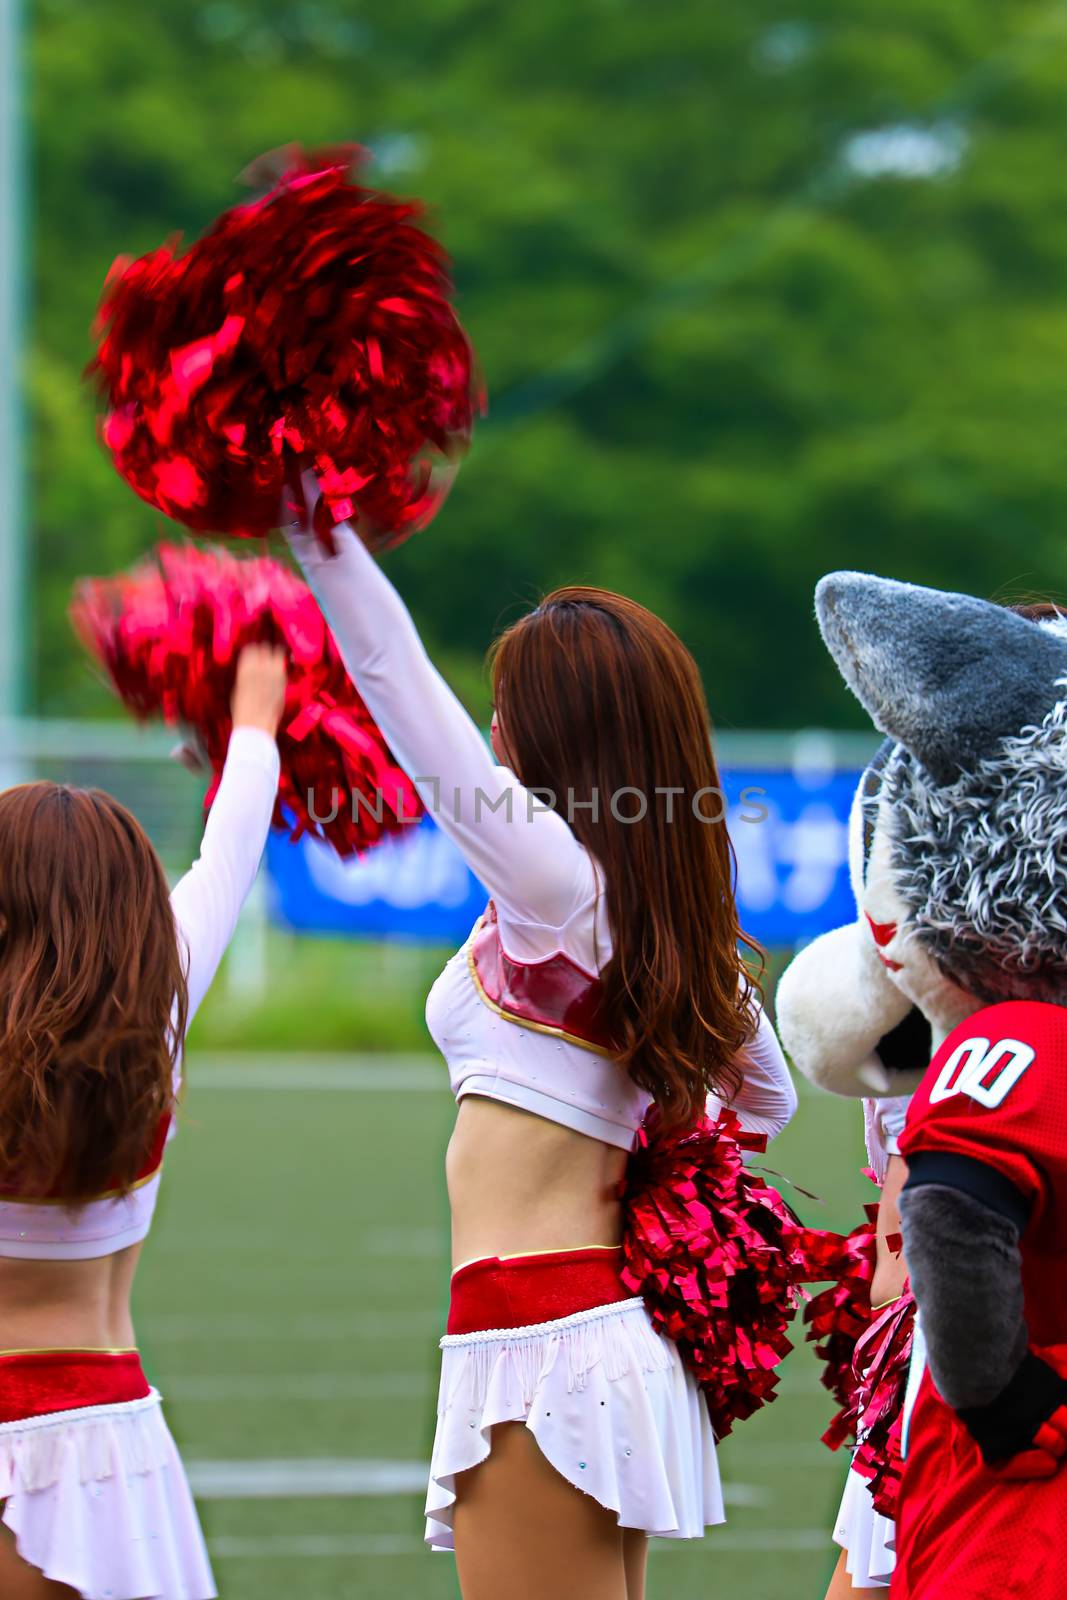 Watching a game Supporting scenery.Cheerleaders in Uniform Holding Pom-Poms.